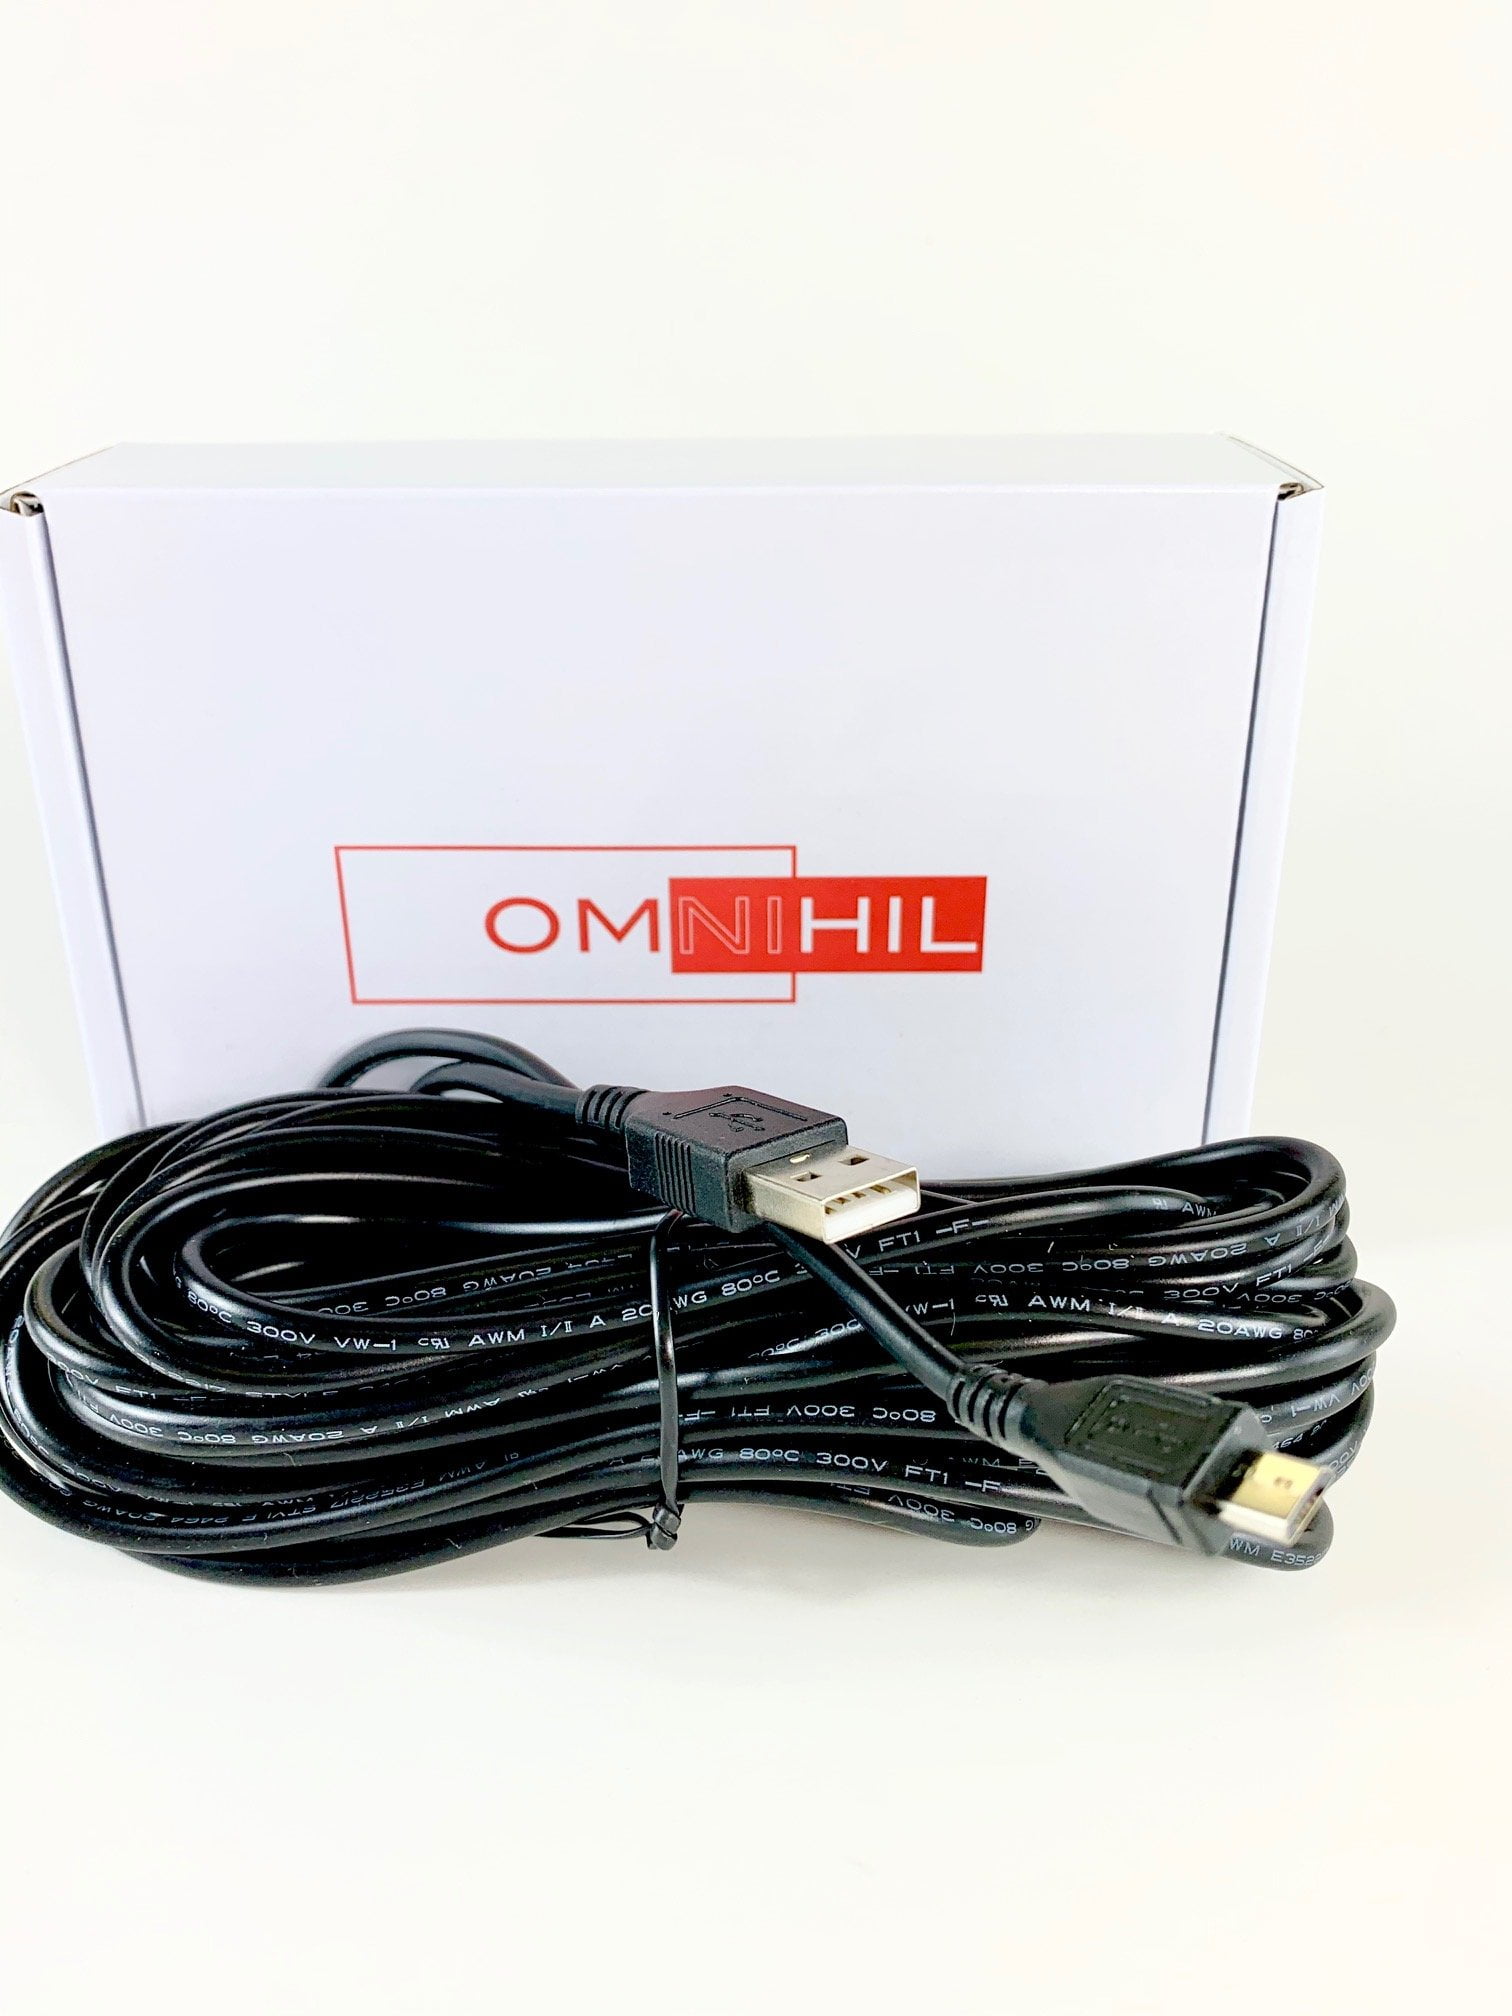 OMNIHIL 5 Feet Long High Speed USB 2.0 Cable Compatible with FLIR TG165 Spot Thermal Camera 